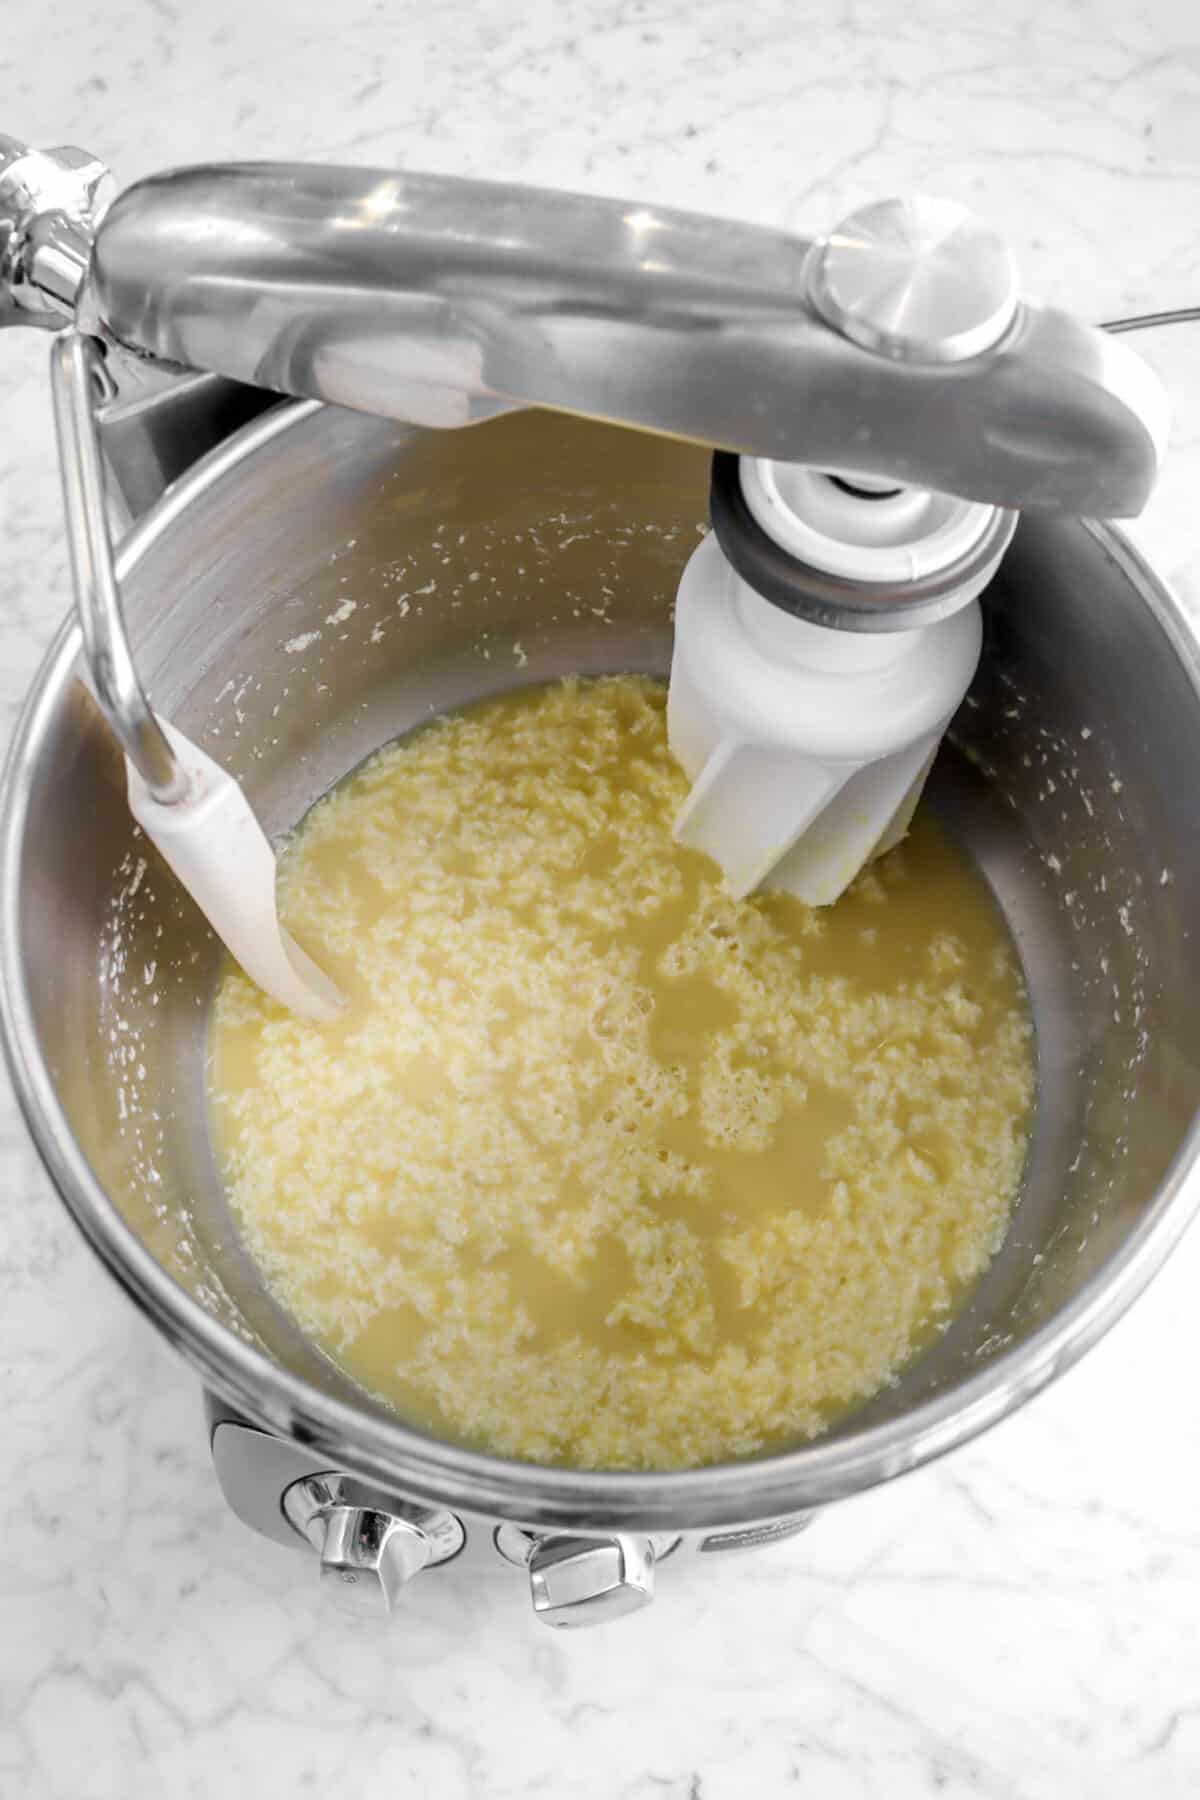 wet ingredients mixed in a mixer